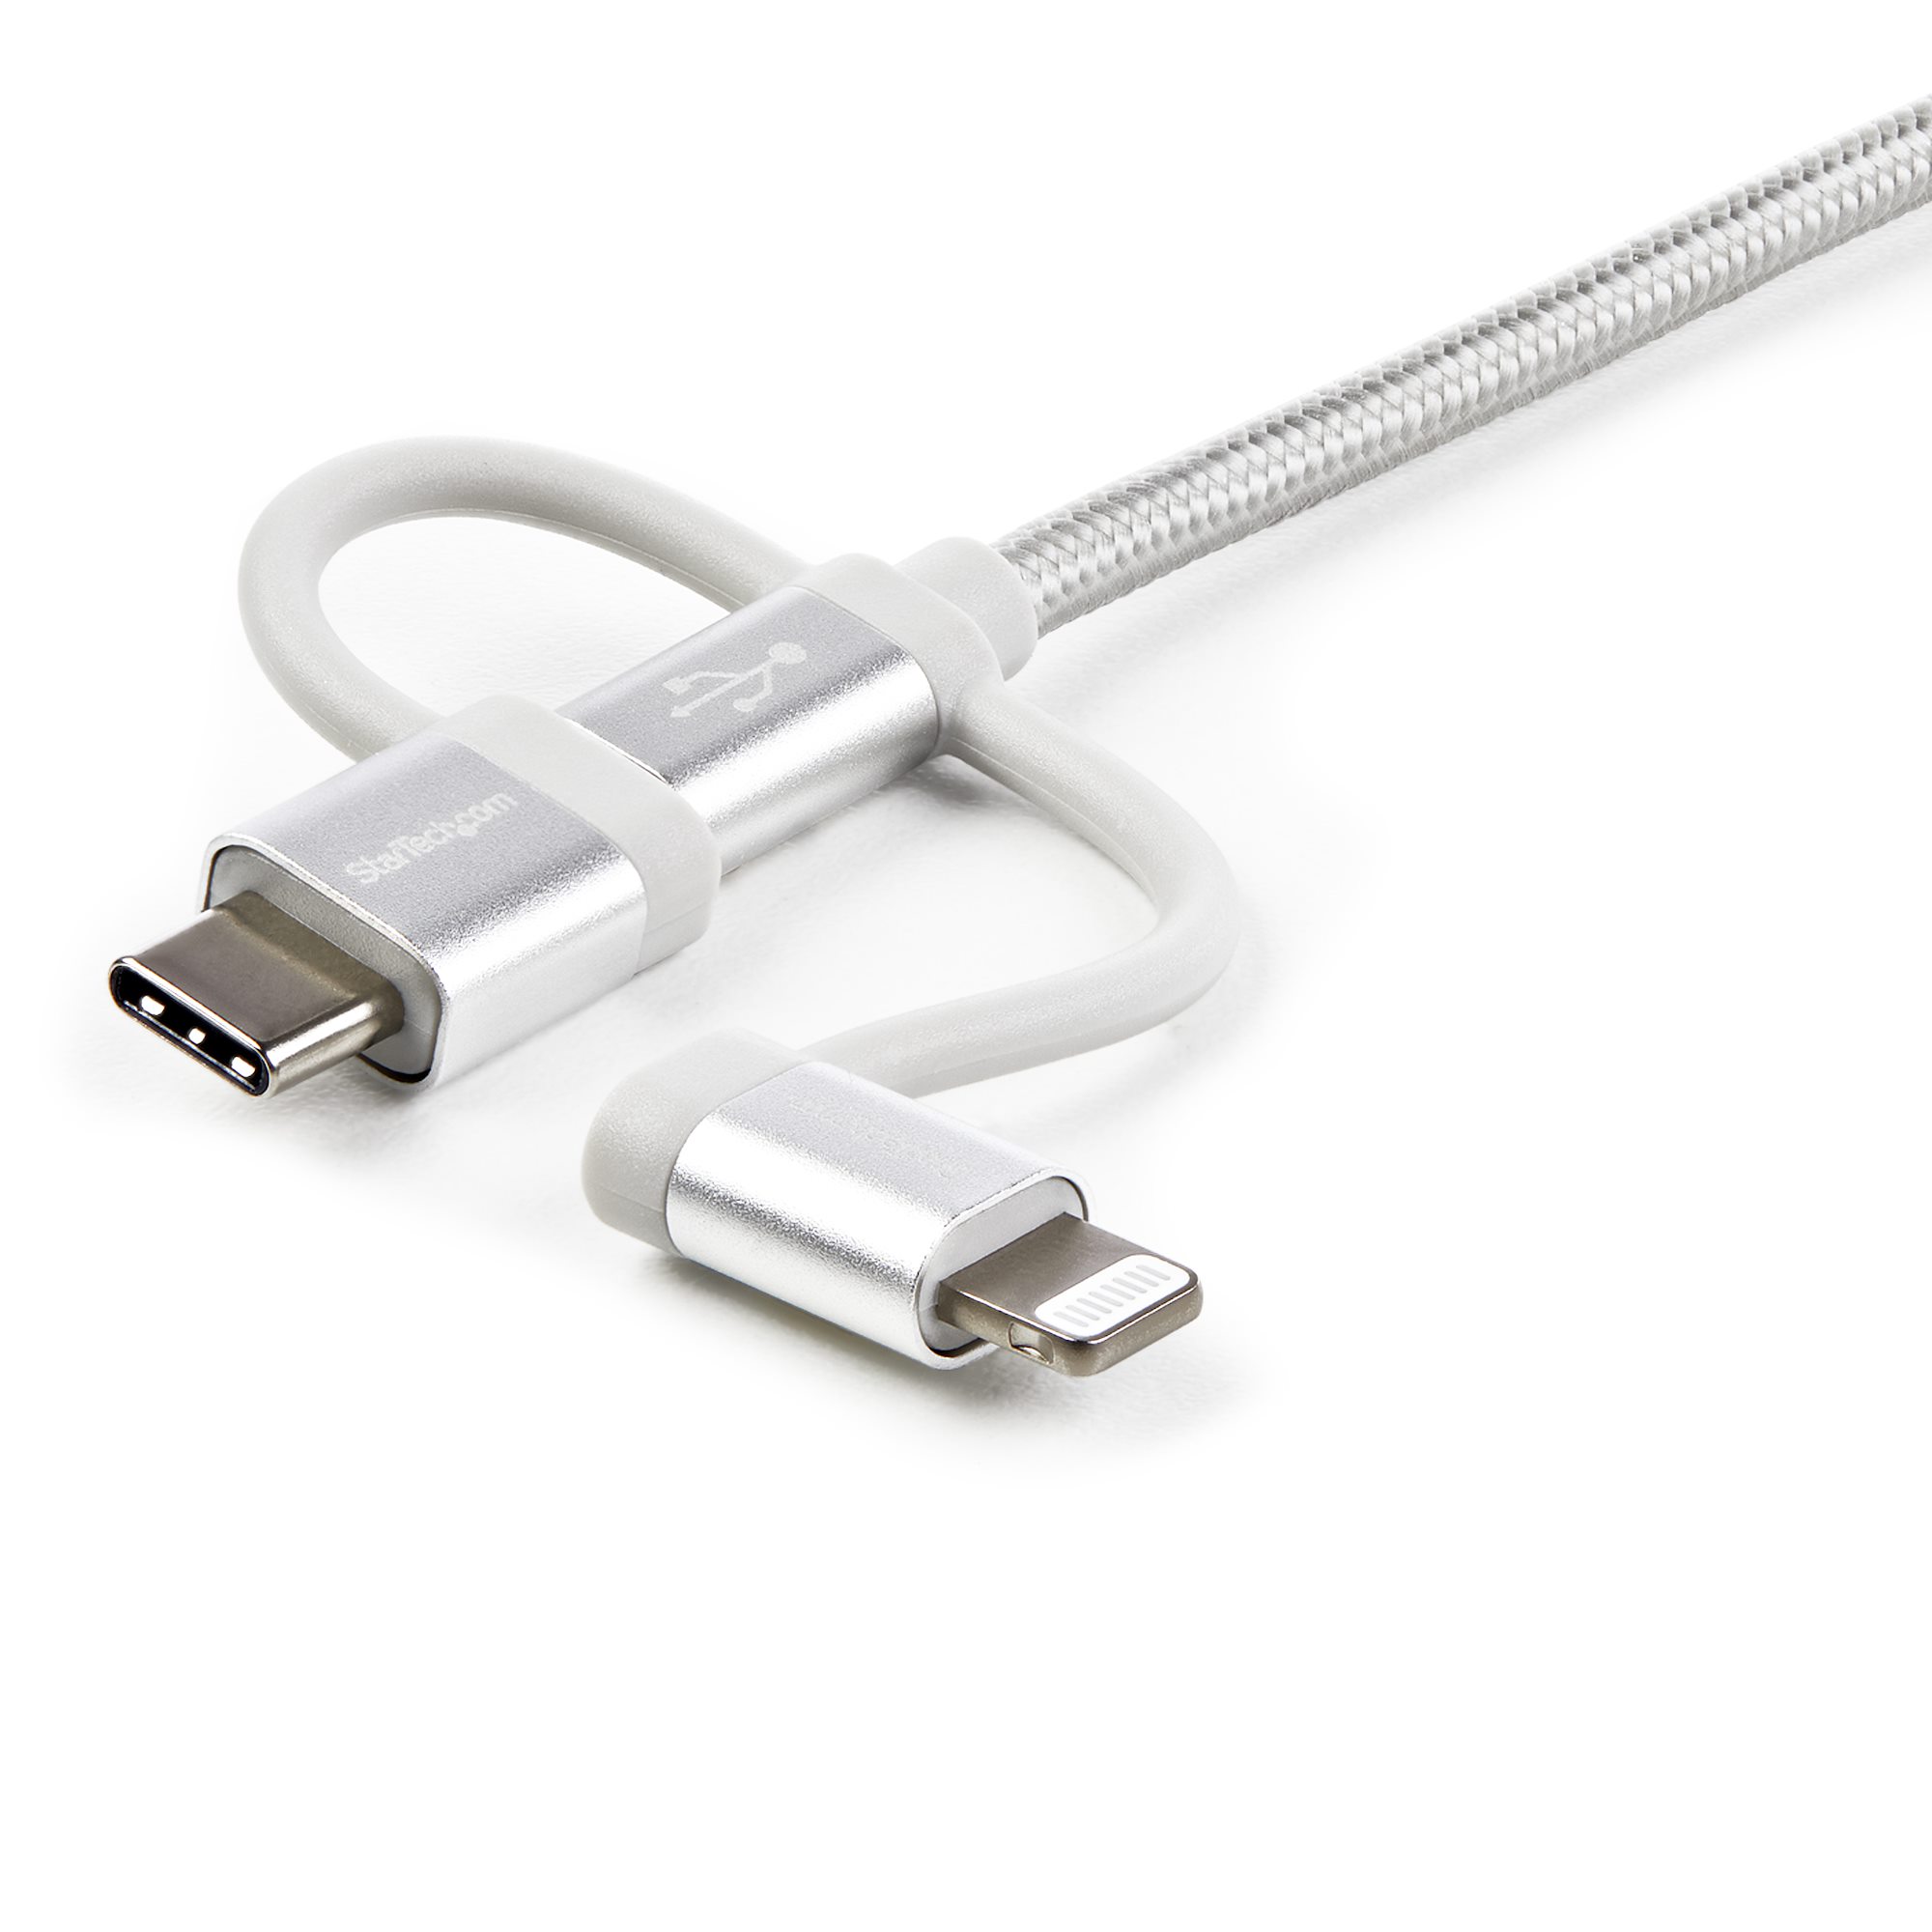 1 m (3 ft.) USB Multi Charging Cable - USB to Micro-USB or USB-C or  Lightning for iPhone / iPad / iPod / Android - Apple MFi Certified - 3 in 1  USB